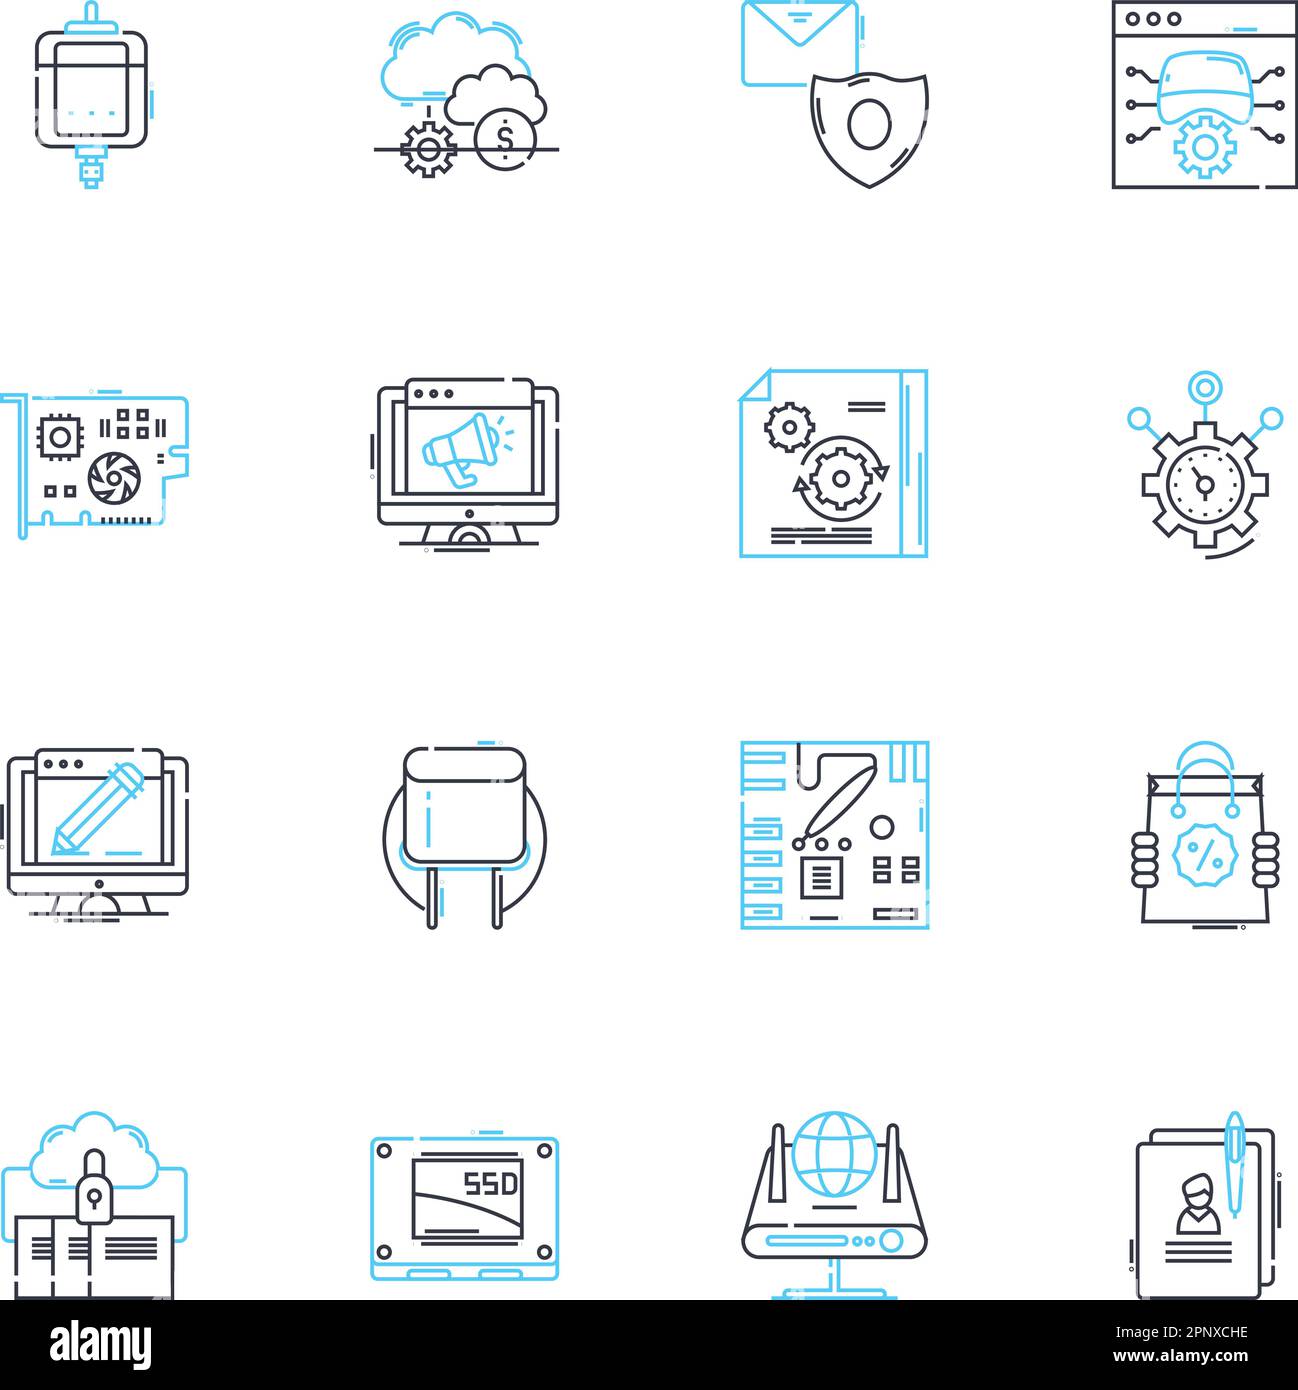 Artificial intelligence linear icons set. Robotics, Automation, Machine Learning, Algorithms, Neural Nerks, Expert Systems, Cognitive Computing line Stock Vector